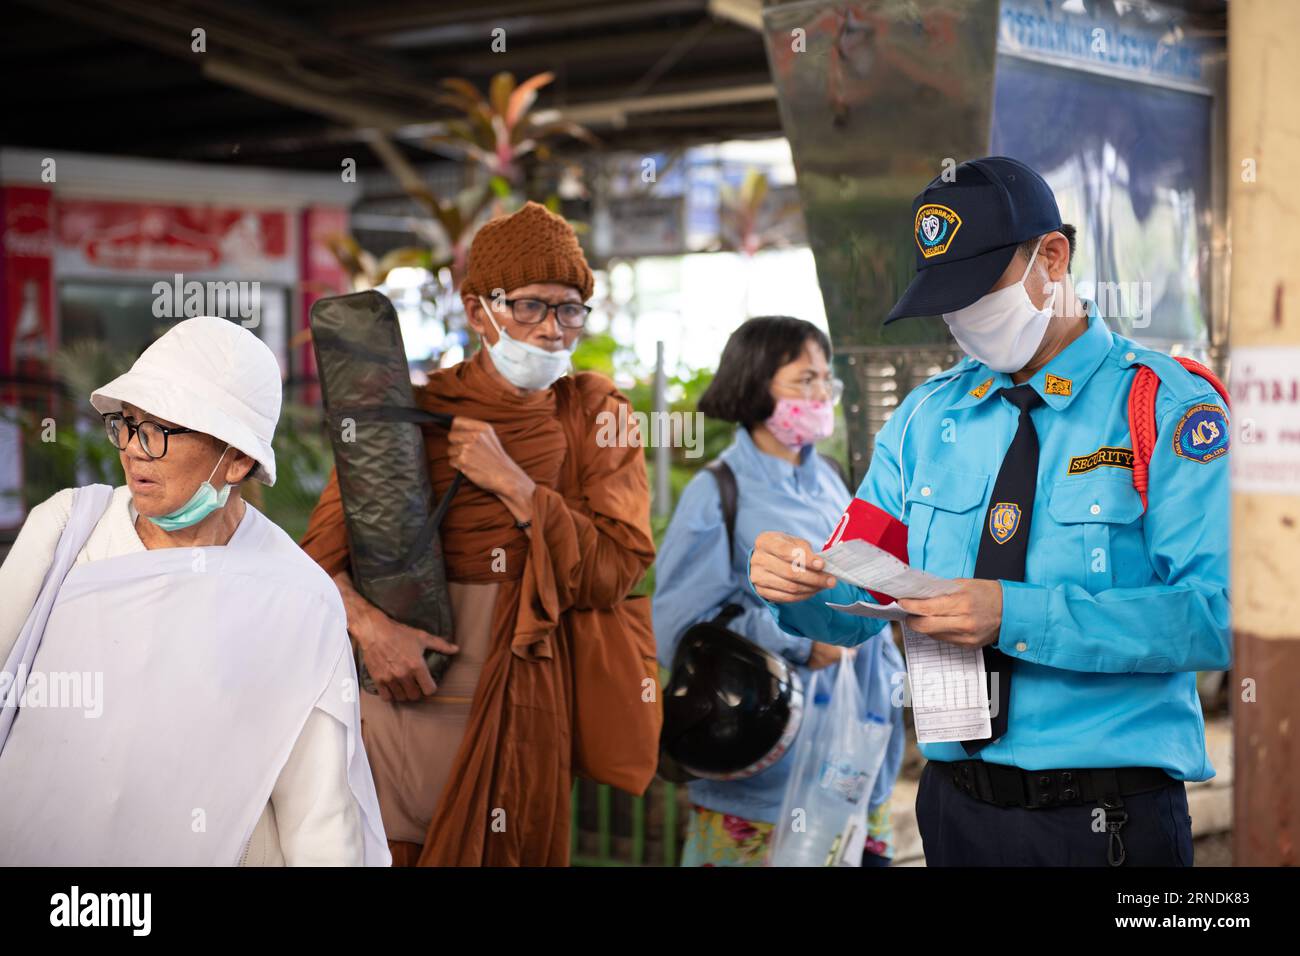 In this focused shot, a platform attendant at Hua Lamphong Railway Station in Bangkok holds and examines a ticket while assisting a passenger. The ima Stock Photo